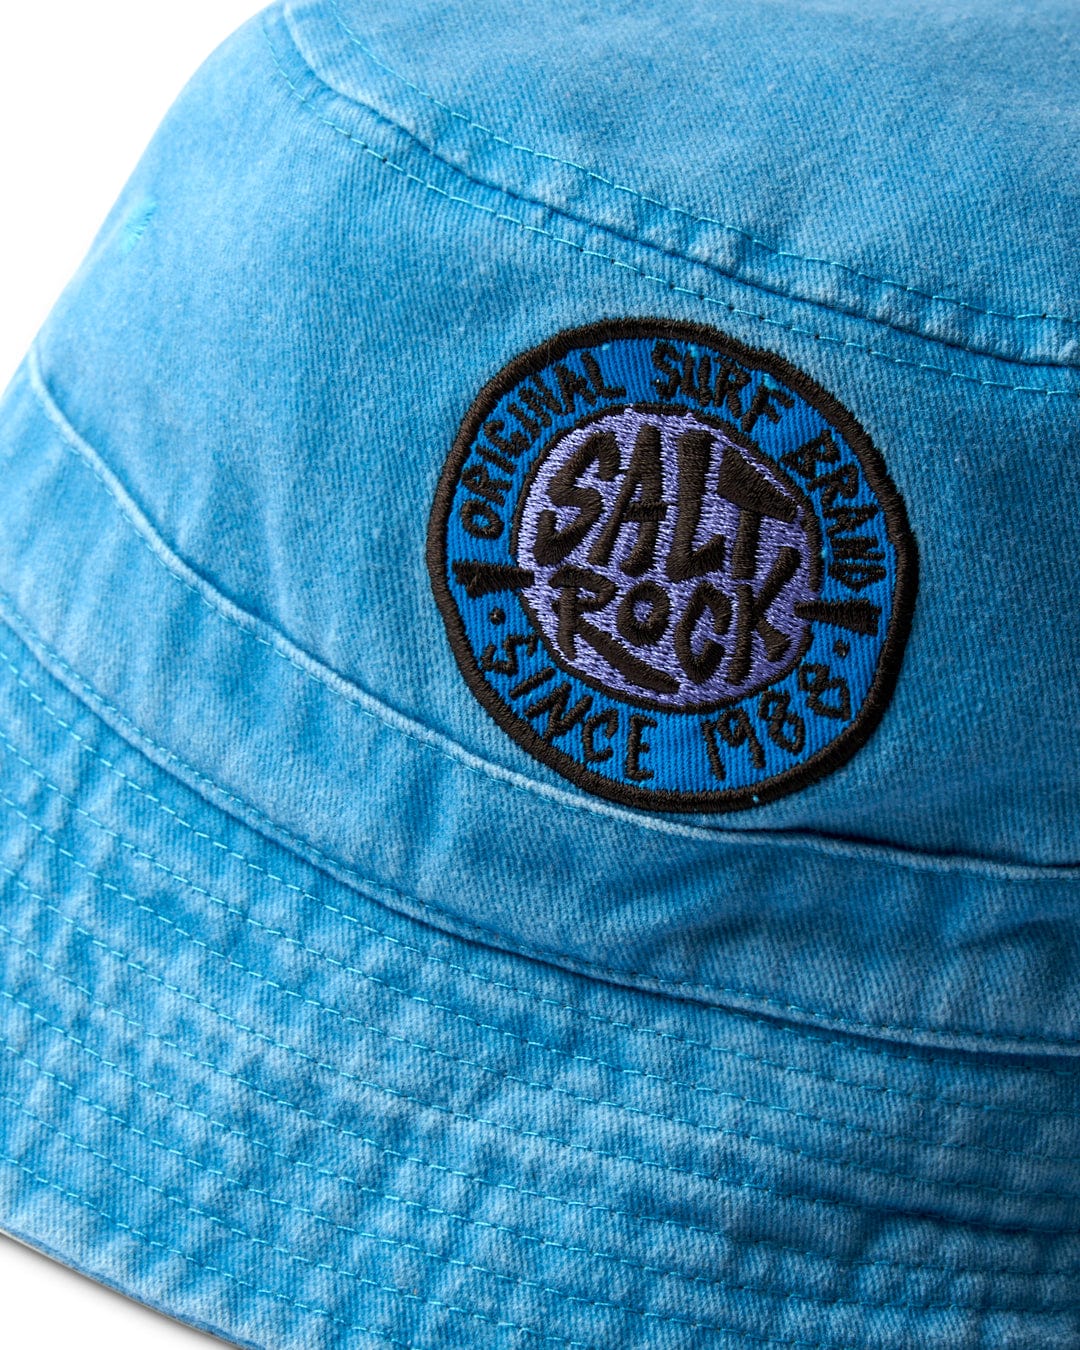 Close-up of a blue 100% cotton fabric cap with an embroidered Saltrock badge that reads "Original Surf Since 1983" on the SR Original - Bucket Hat - Blue.